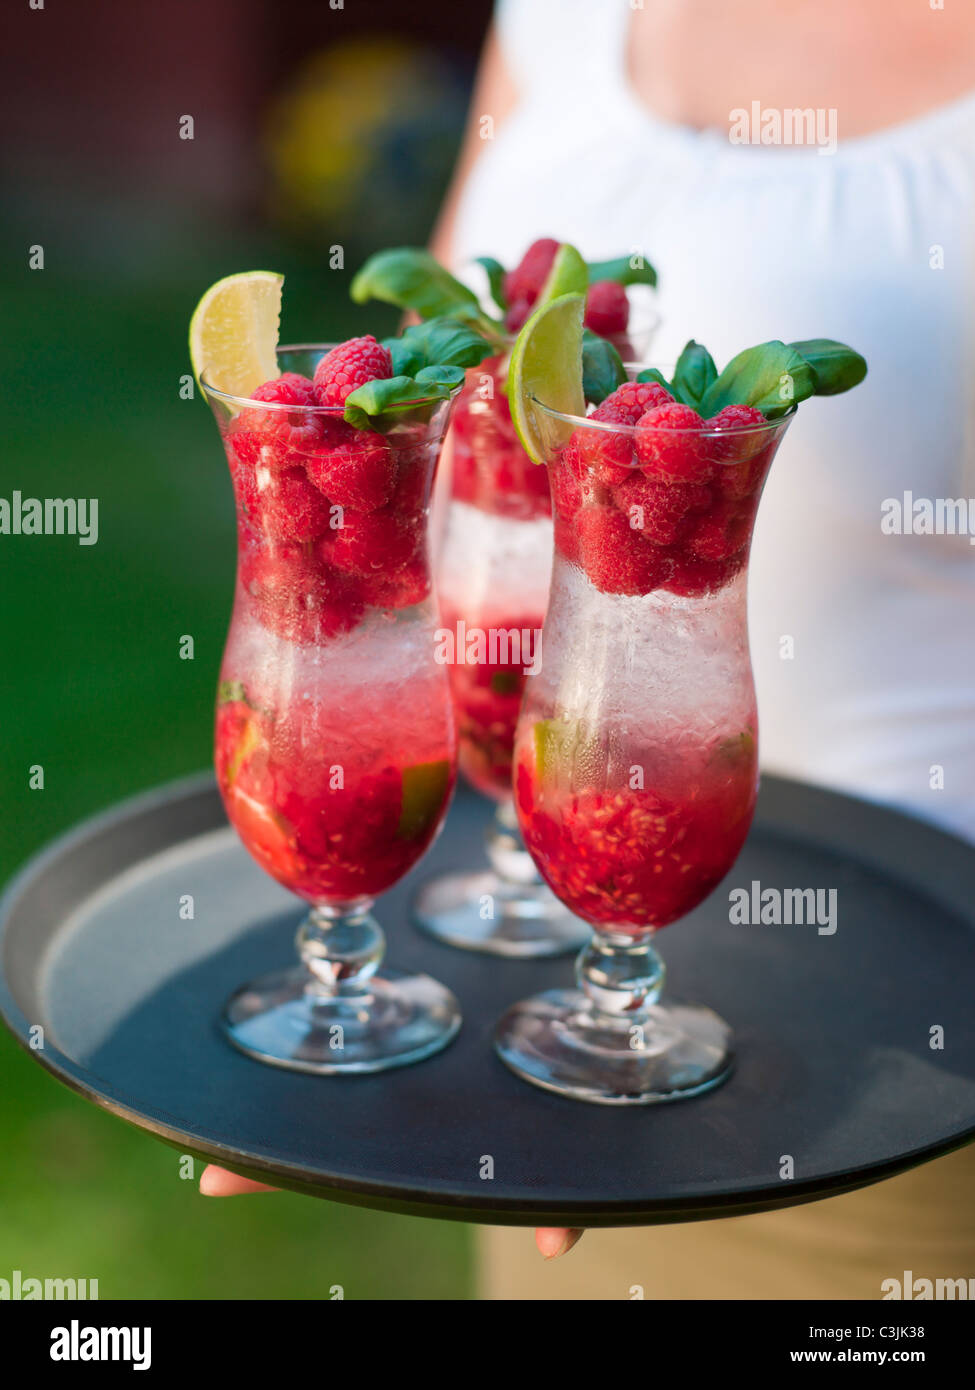 Person holding tray with glasses of cocktail Stock Photo